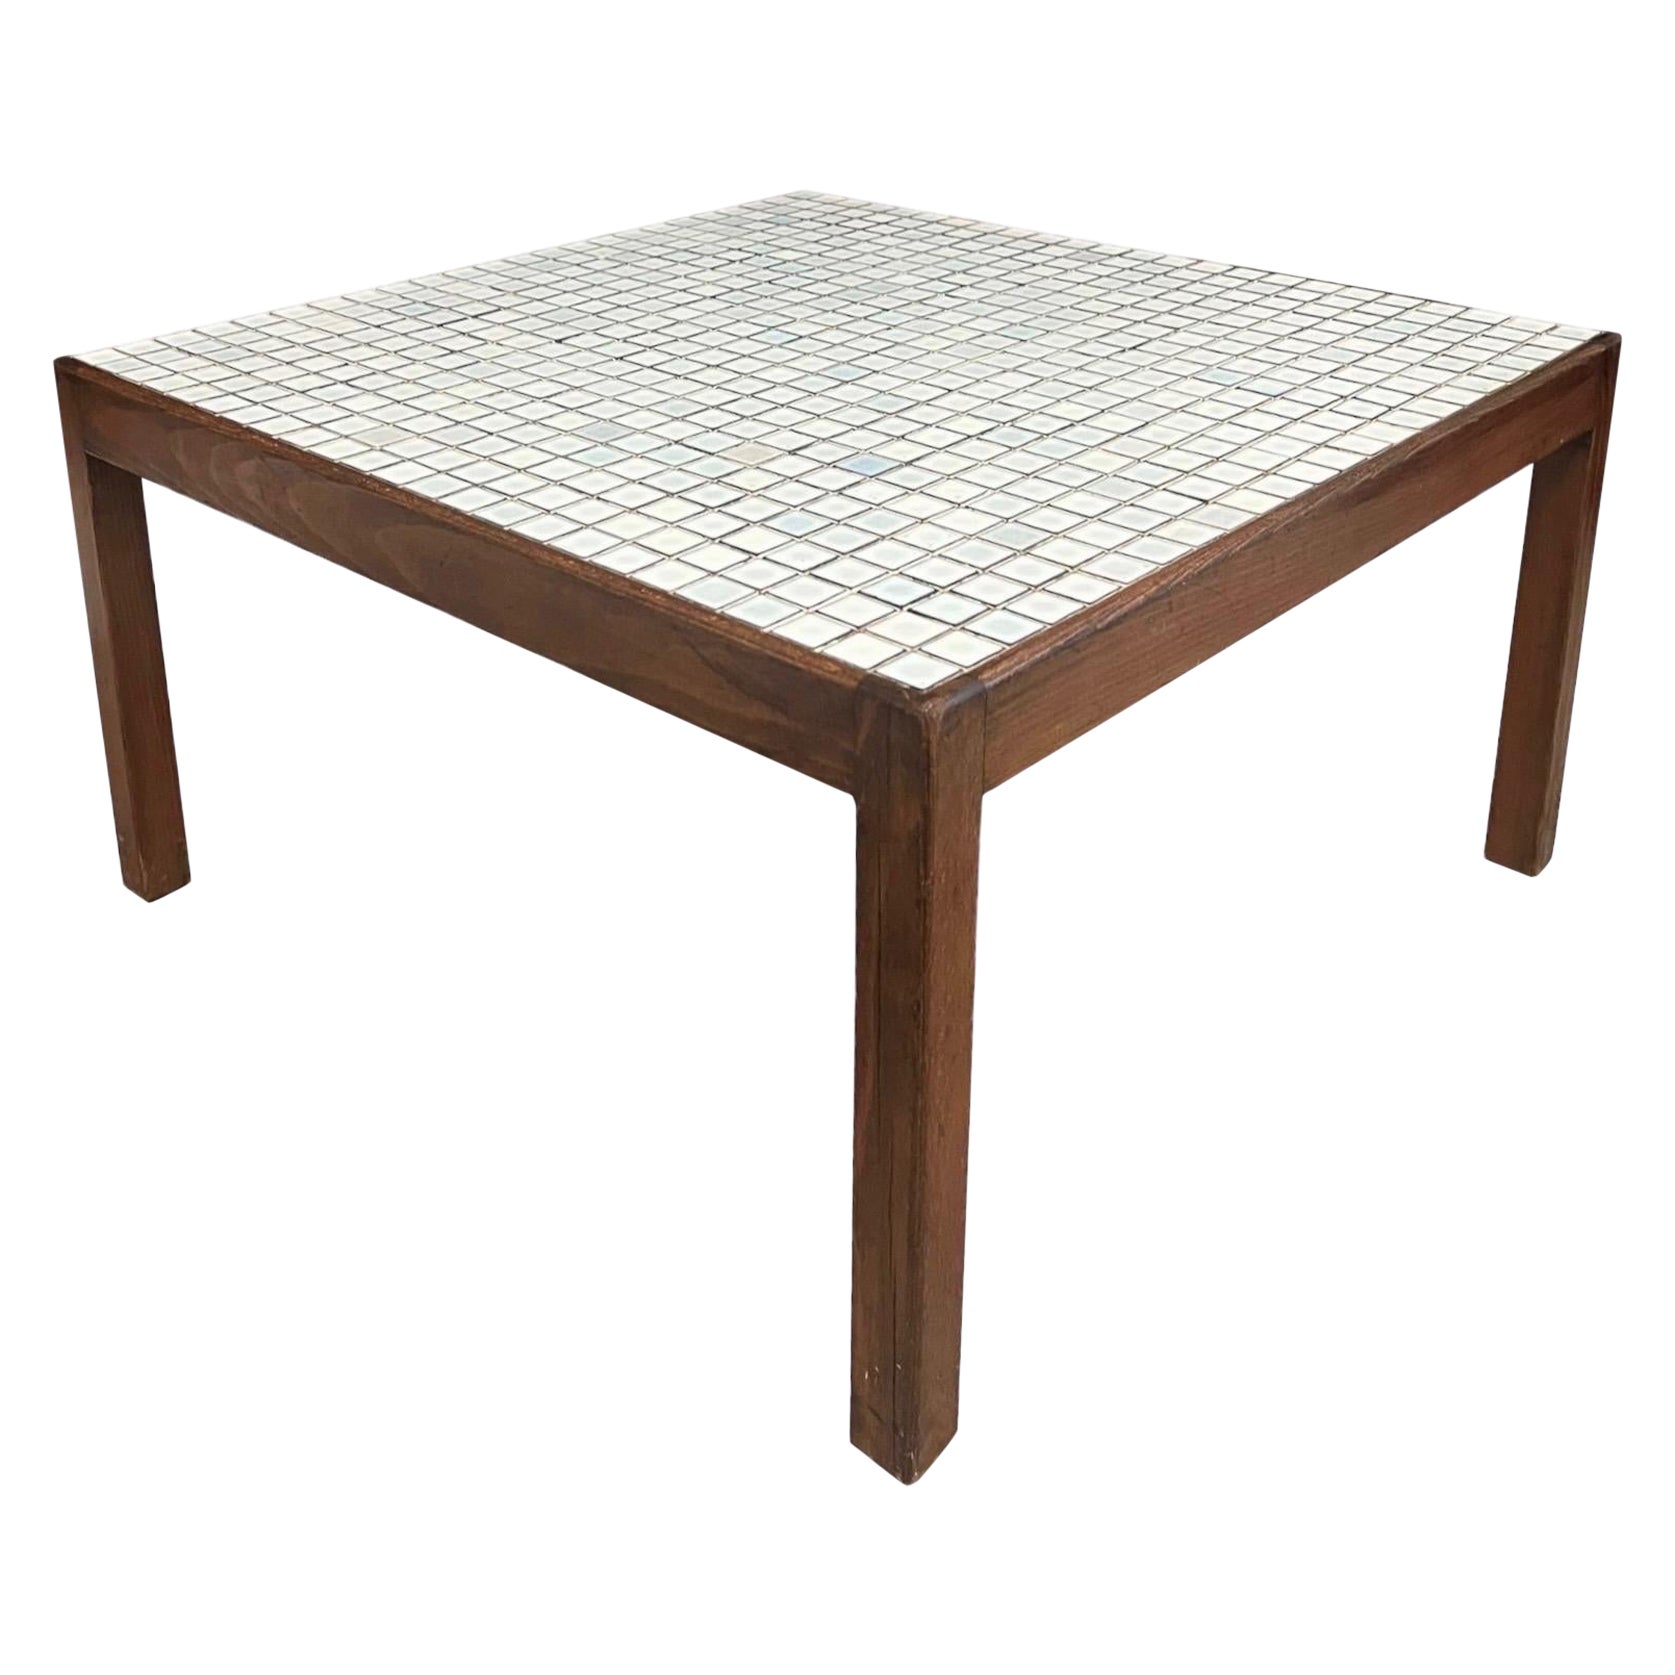 Vintage Mid Century Modern Walnut Table With Tile Top For Sale